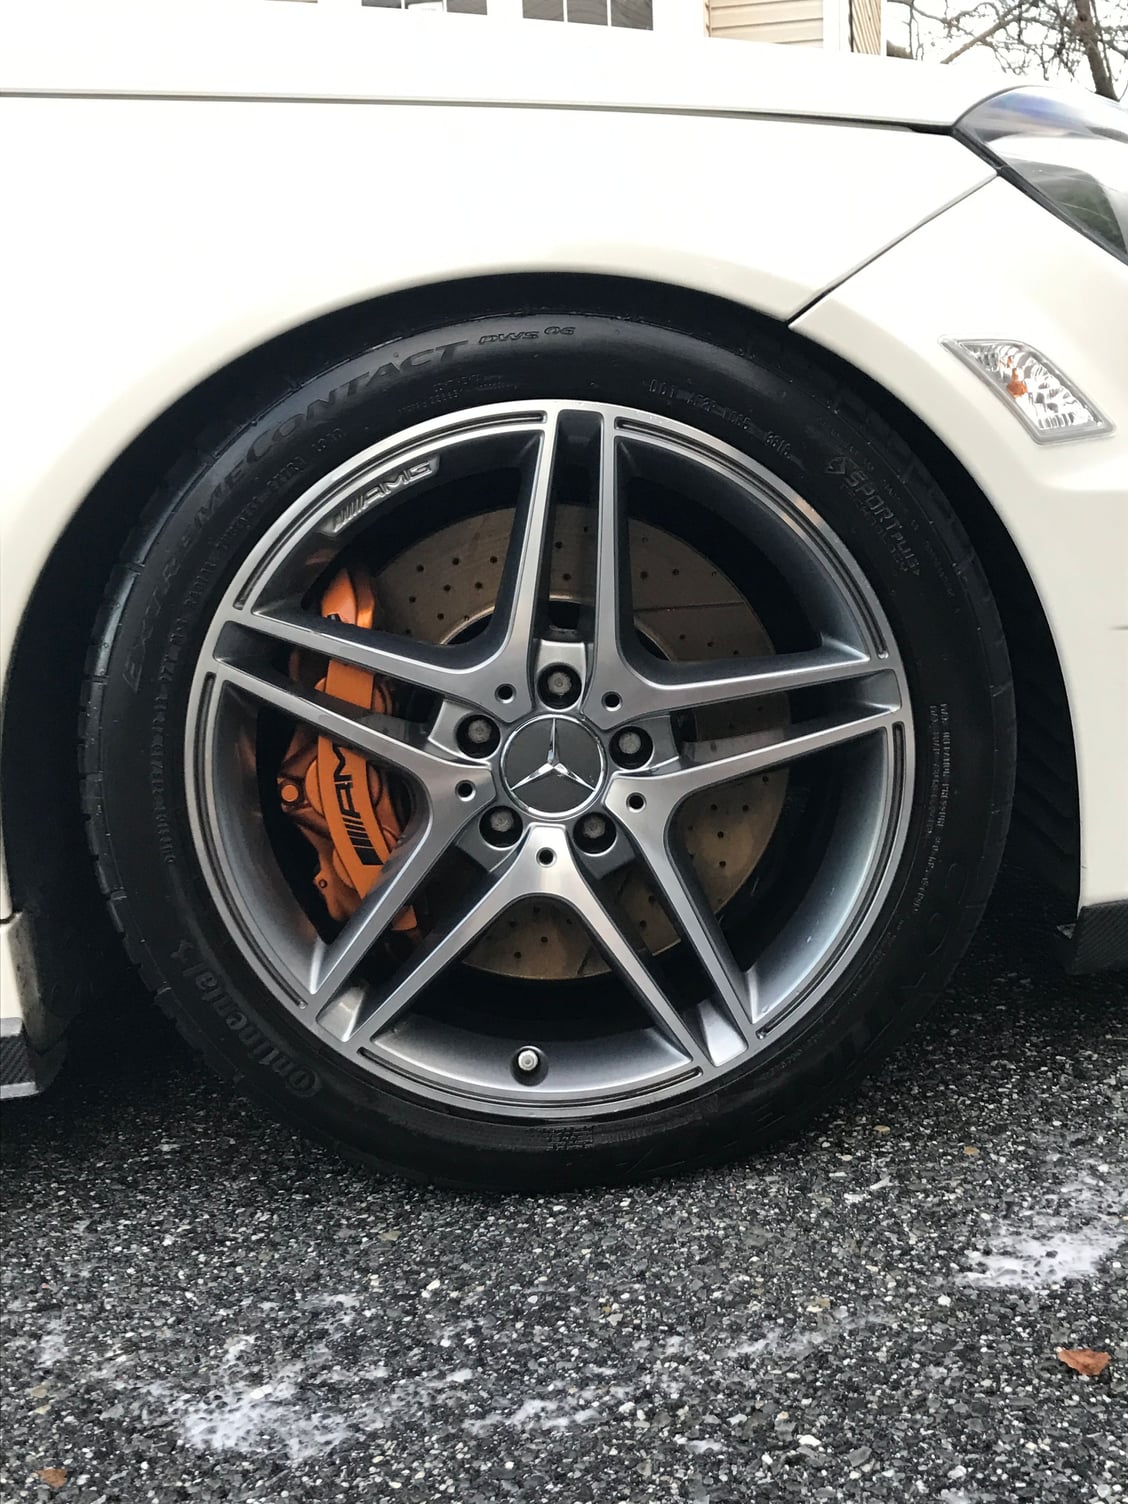 Wheels and Tires/Axles - 18" OEM AMG Wheels with Conti DWS06 and TPMS - Used - 2012 to 2015 Mercedes-Benz C63 AMG - Rockville, MD 20855, United States